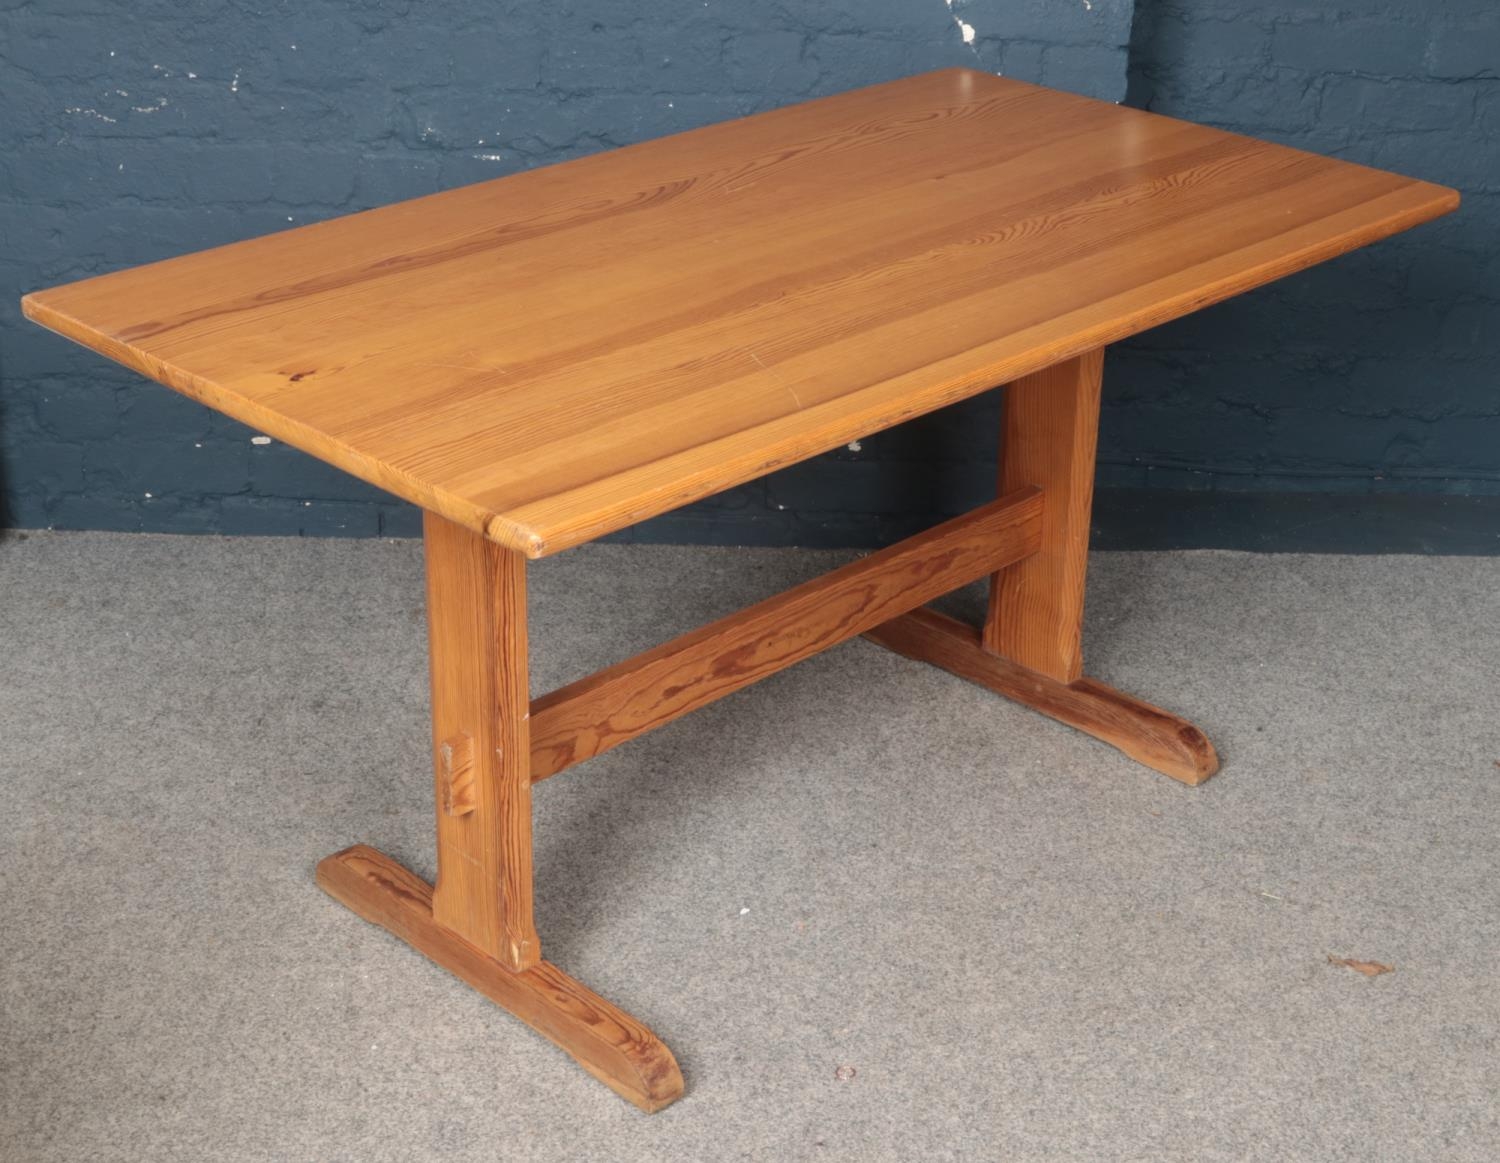 A Ercol pine refectory dining table. (73cm height, 81cm width, 142cm length) comes with pine